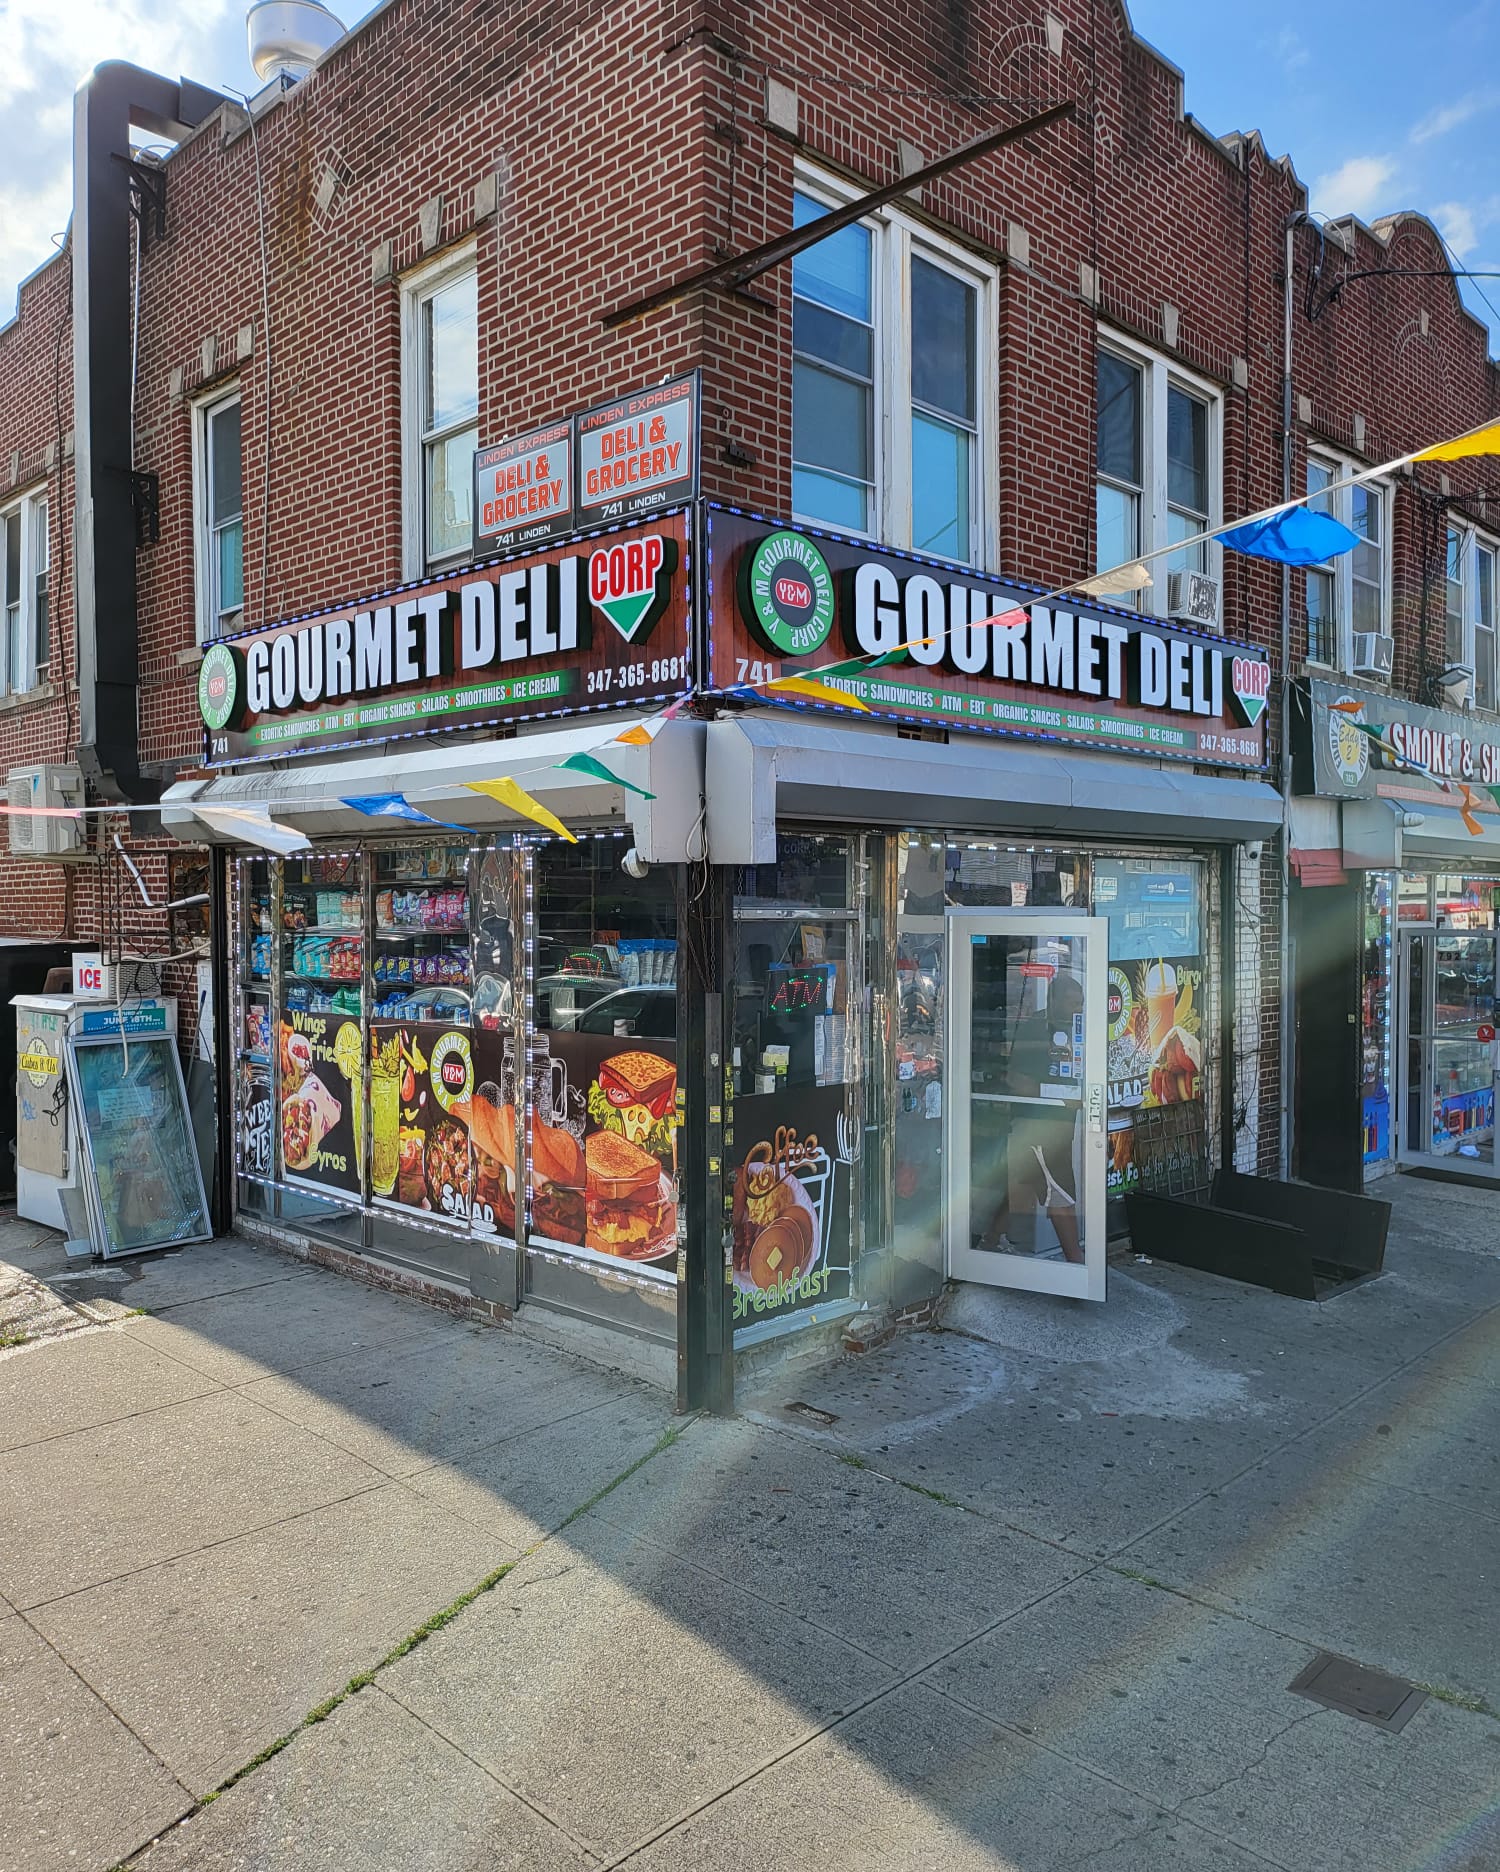 Signs Awnings & Graphics | 684 Utica Ave, Brooklyn, NY 11203, United States | Phone: (347) 581-9219